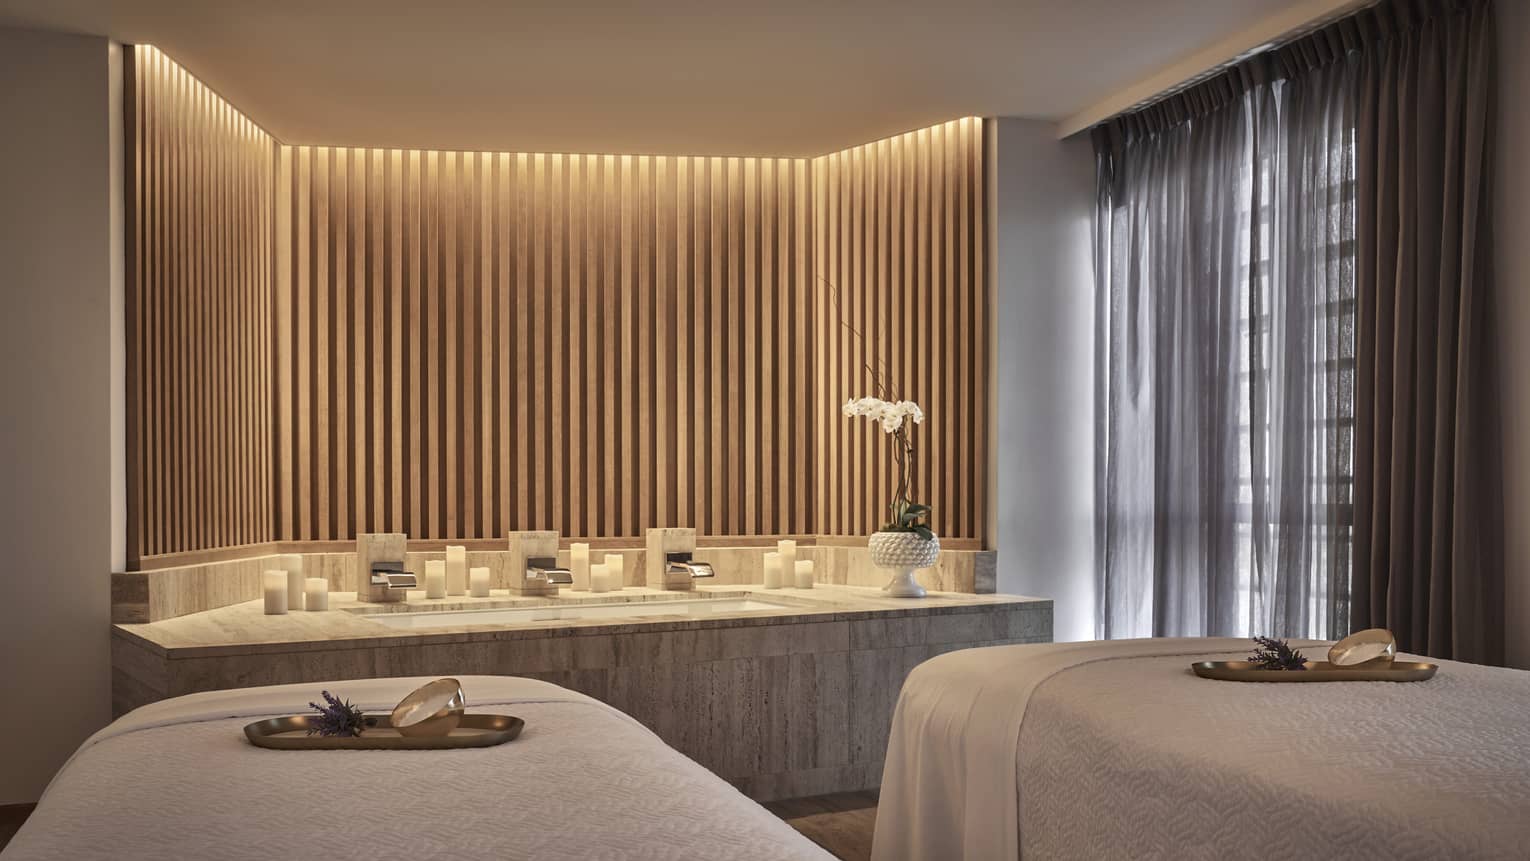 A spa treatment room with two spa beds and dim lighting